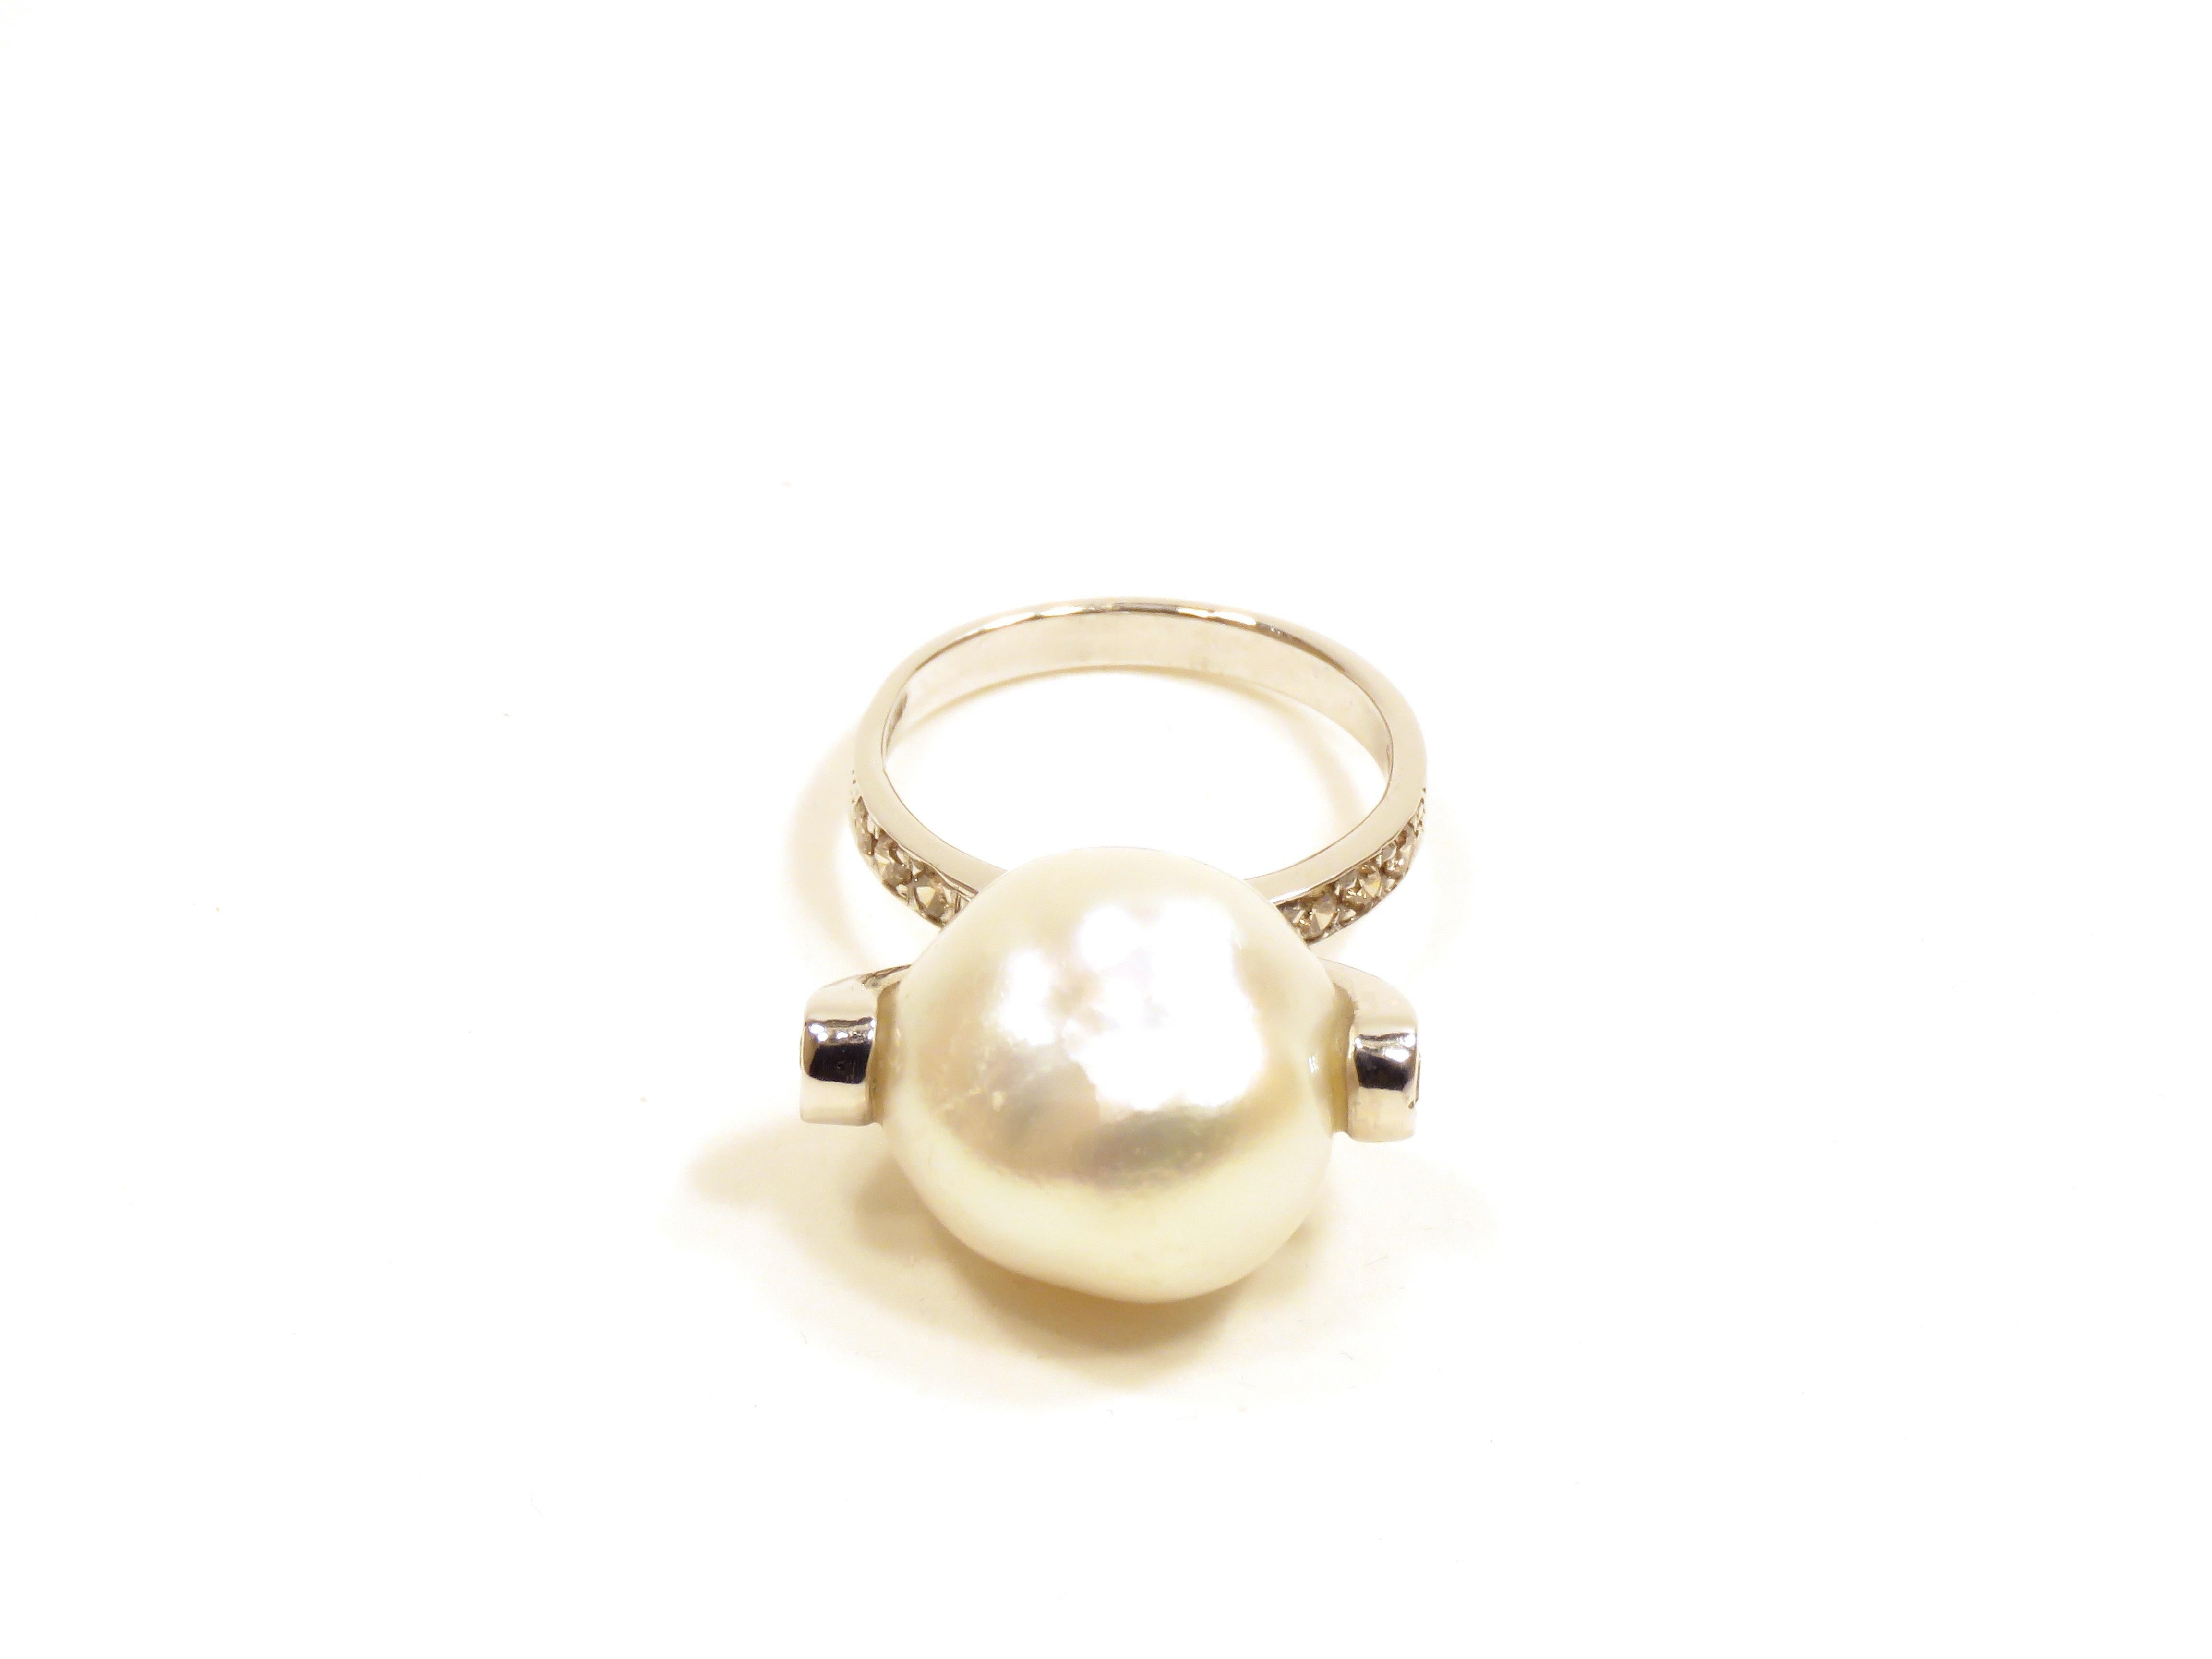 Brilliant Cut White Australian Pearl Diamonds White Gold Ring Handcrafted in Italy For Sale